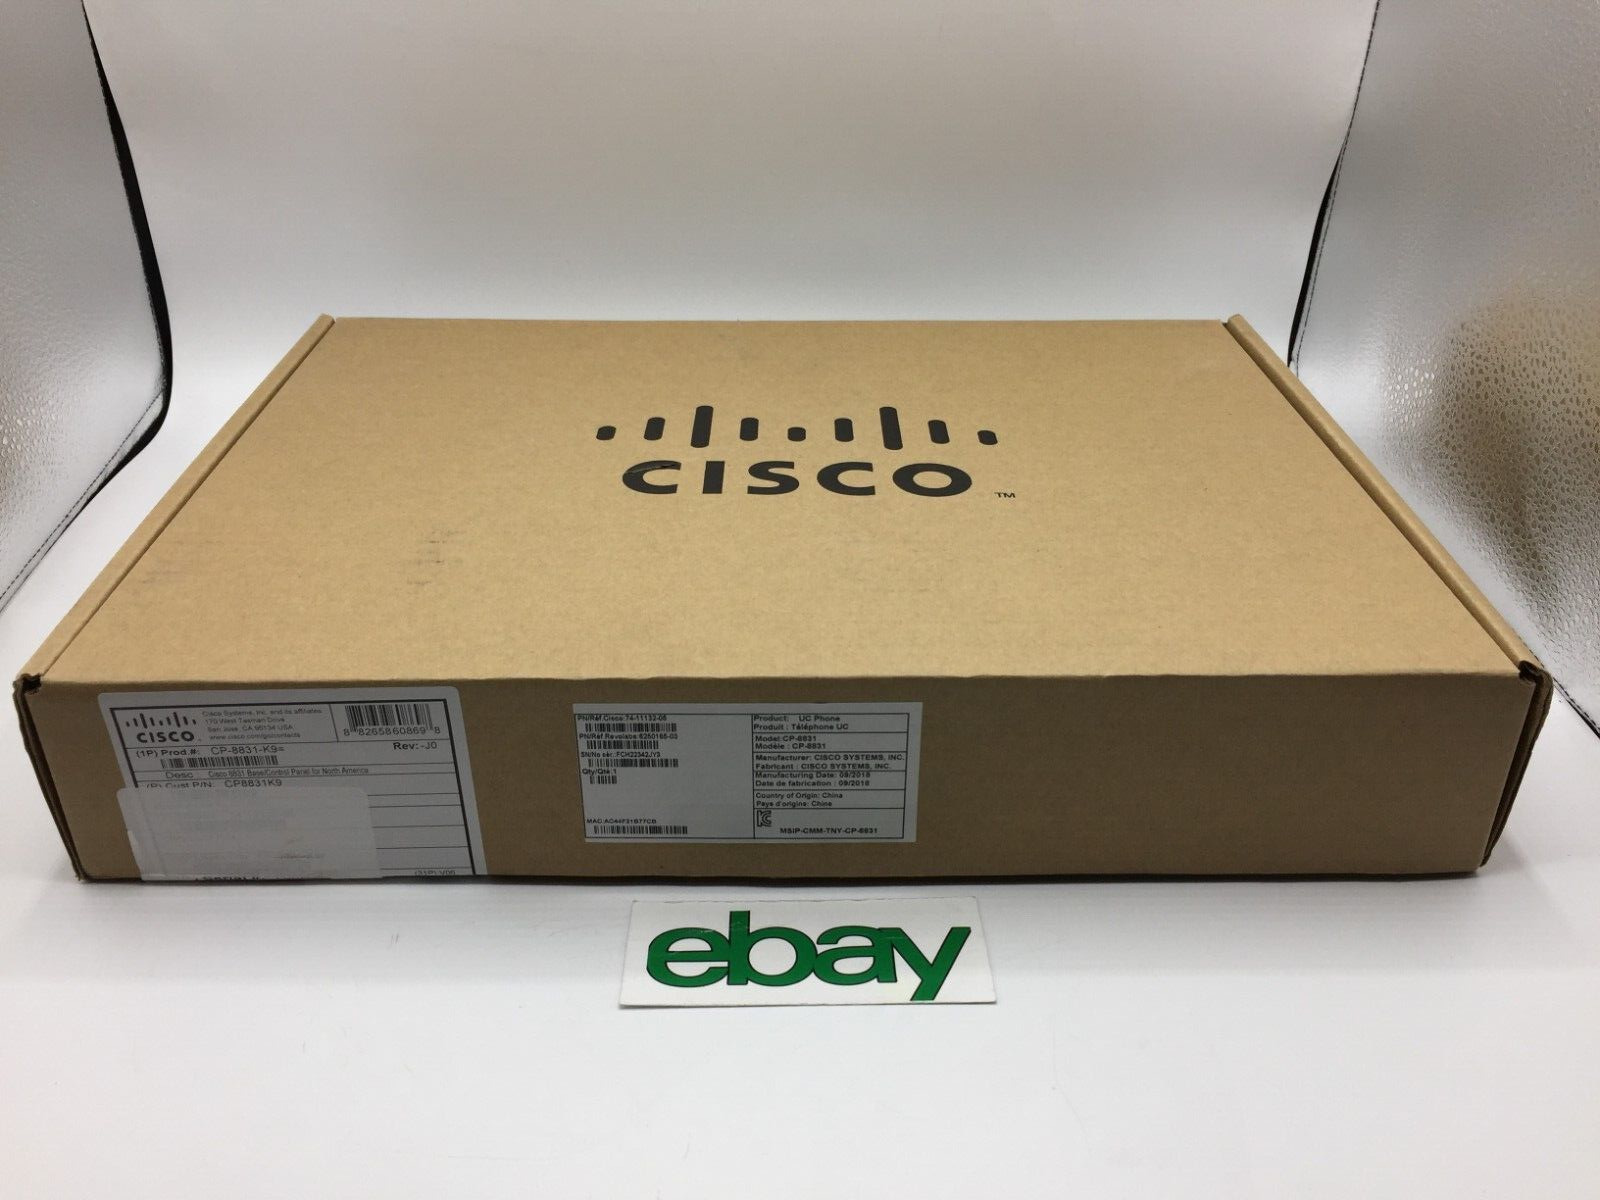 New/Sealed Cisco CP-8831-K9 IP Conference Phone Base & Control Unit FREE S/H